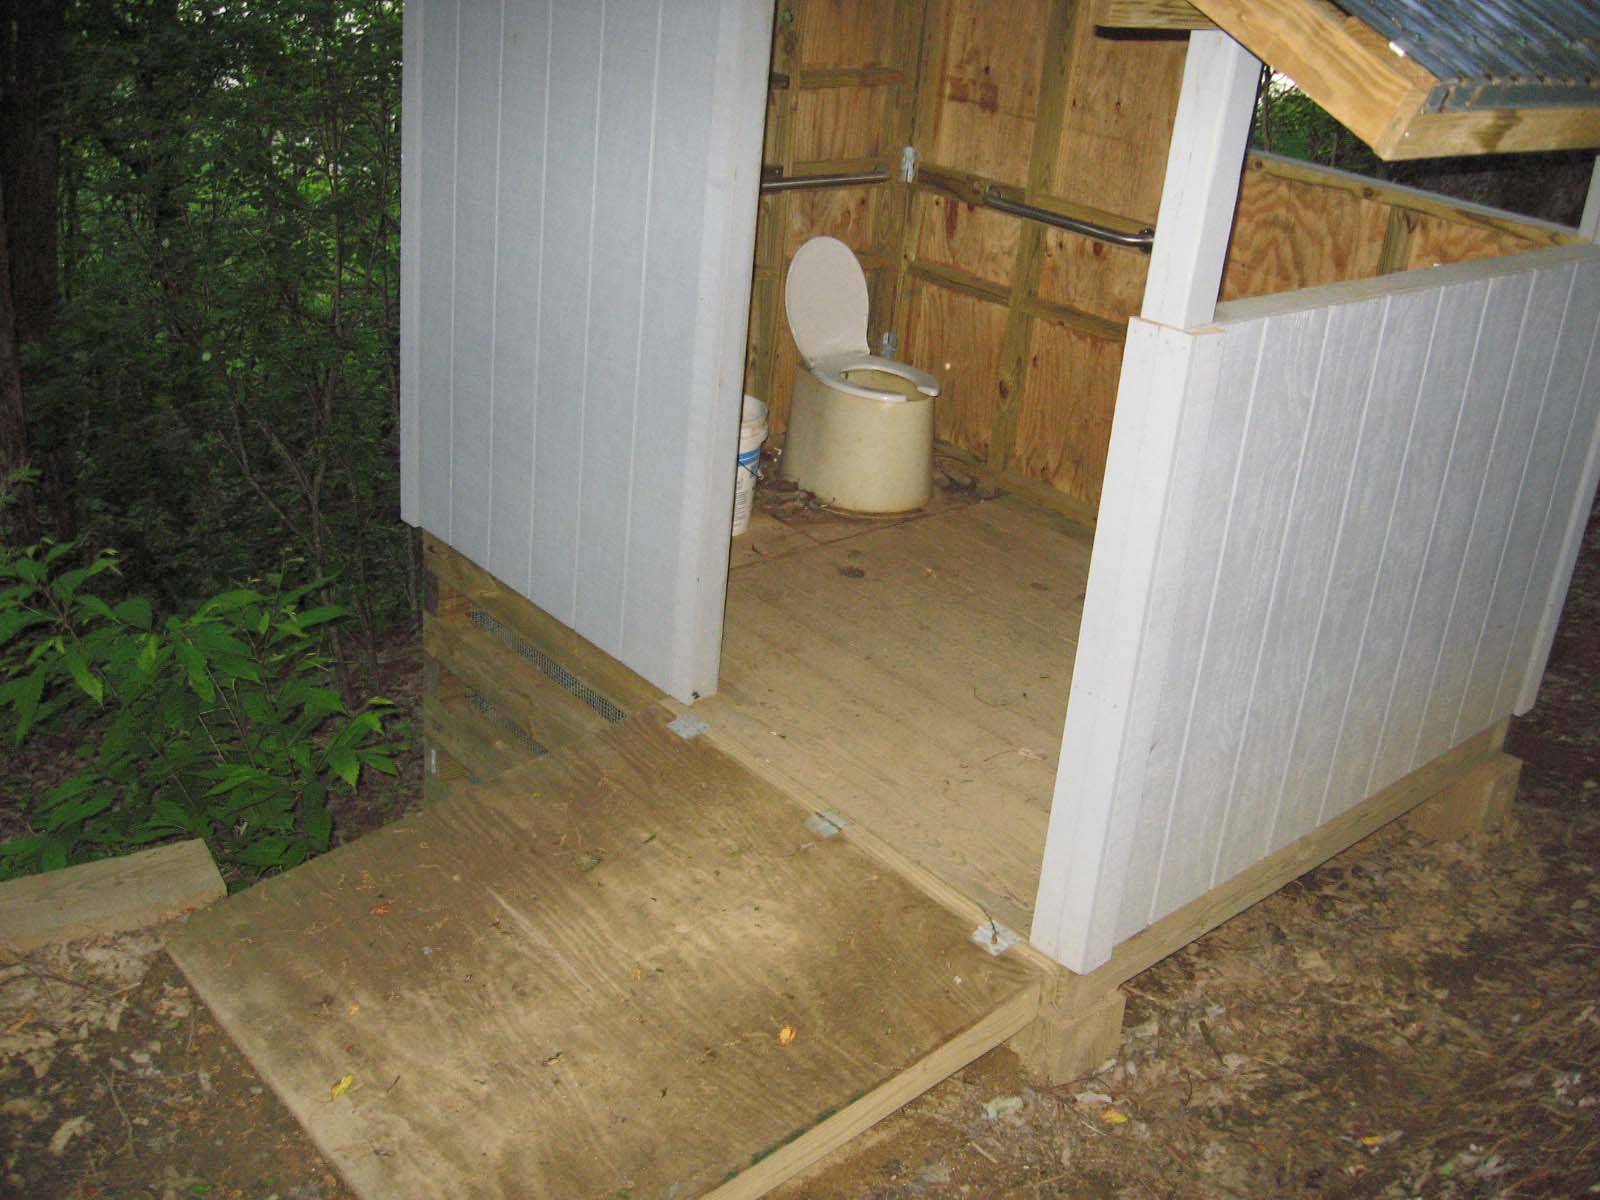 NC state regulations call for handicap accessible privies on top of a completely inaccessible mountain.